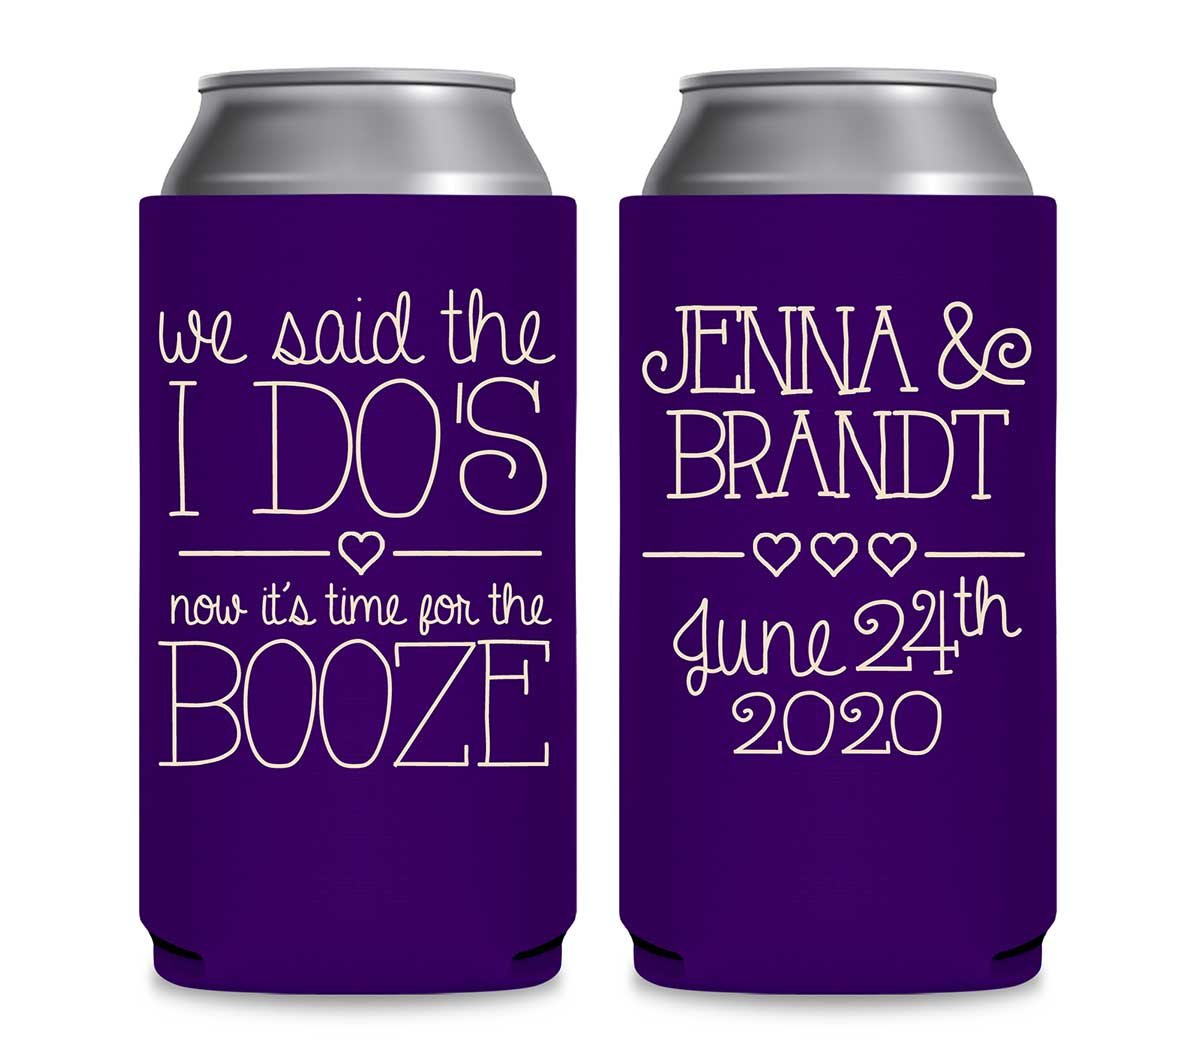 https://www.thatweddingshop.com/wp-content/uploads/2019/12/We-Said-The-I-Dos-Now-Its-Time-For-The-Booze-1A-Collapsible-Foam-12oz-Slim-Can-Koozies-Personalized-Wedding-Favors.jpg